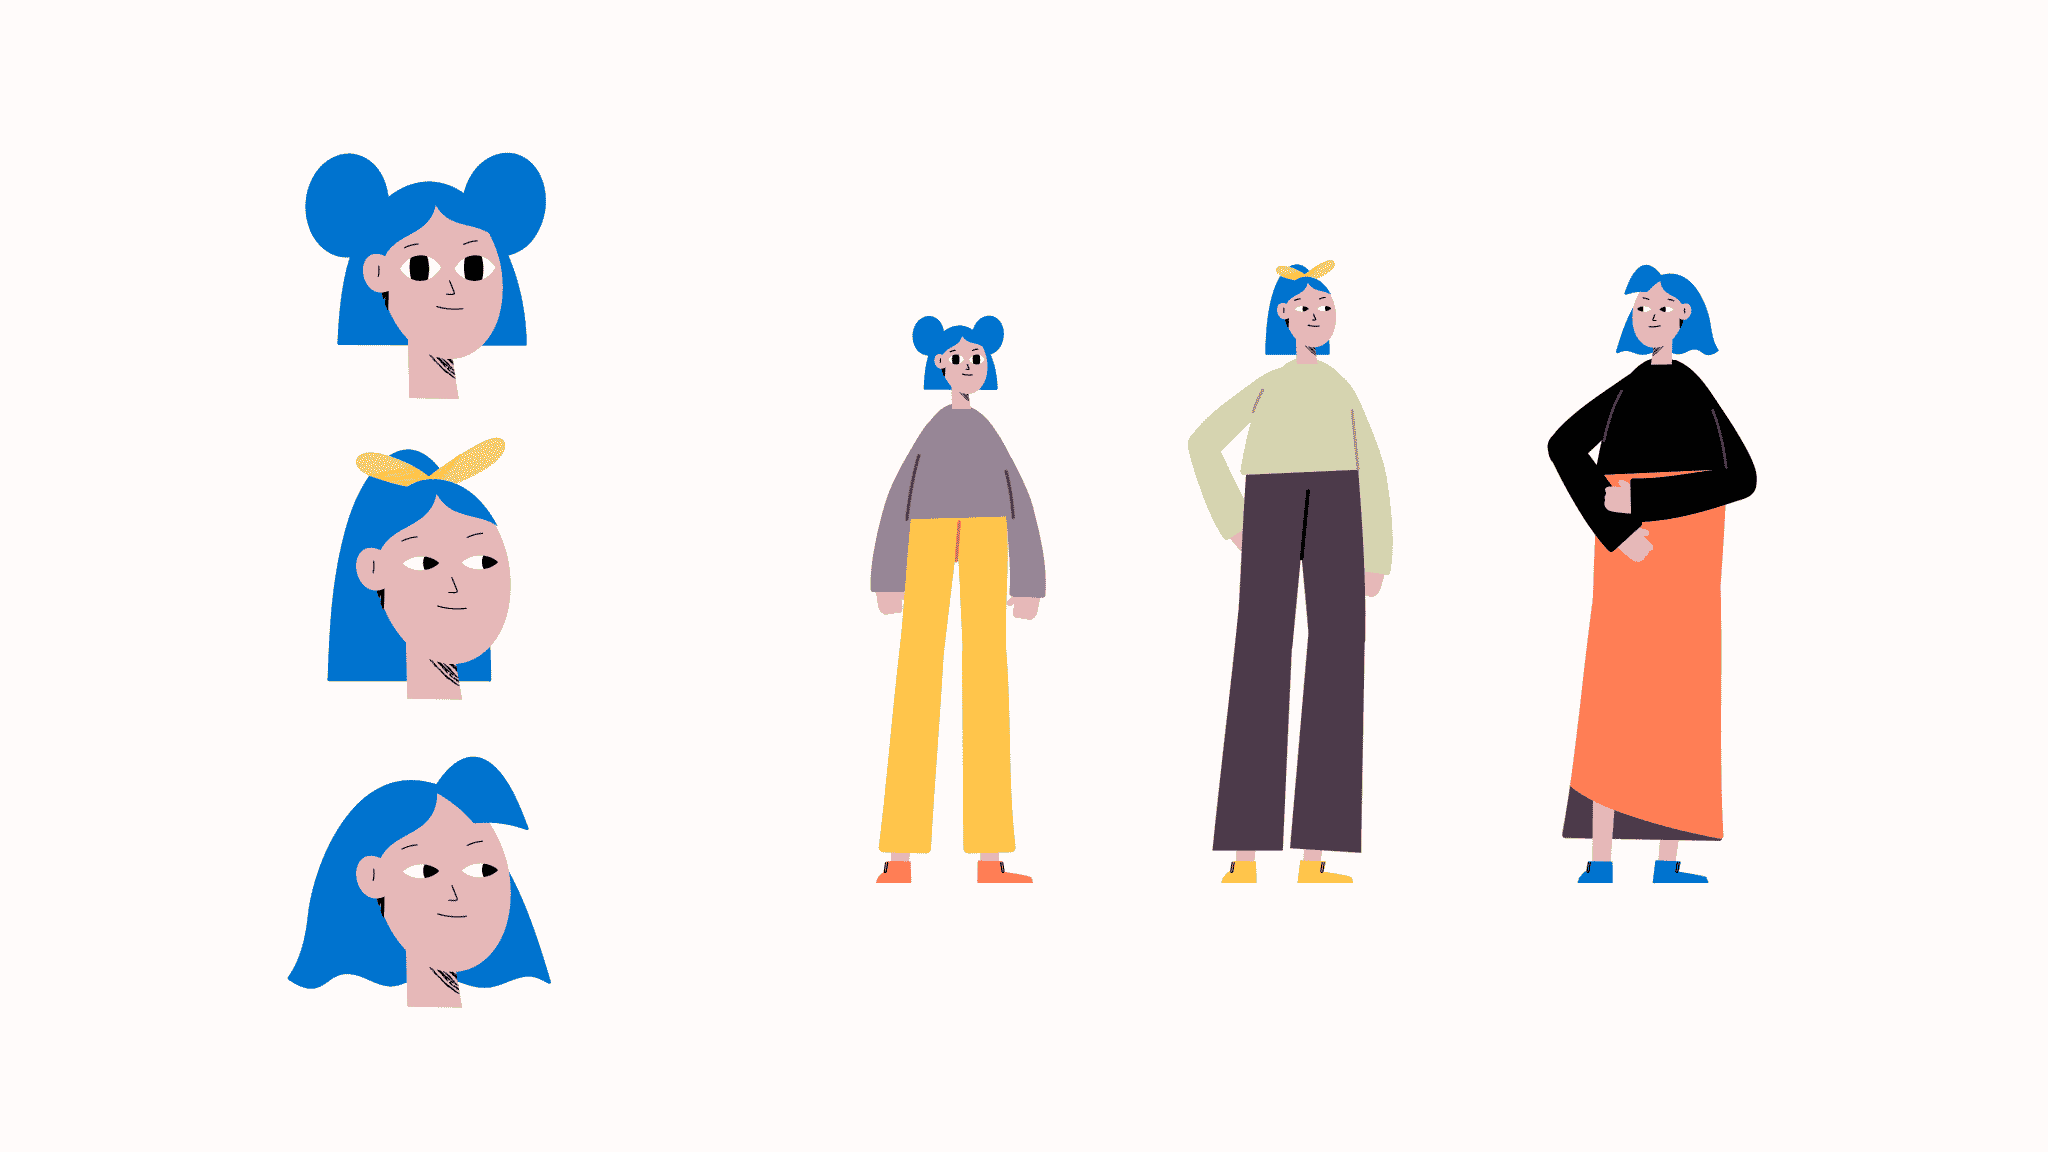 plan-style-exploration-characters